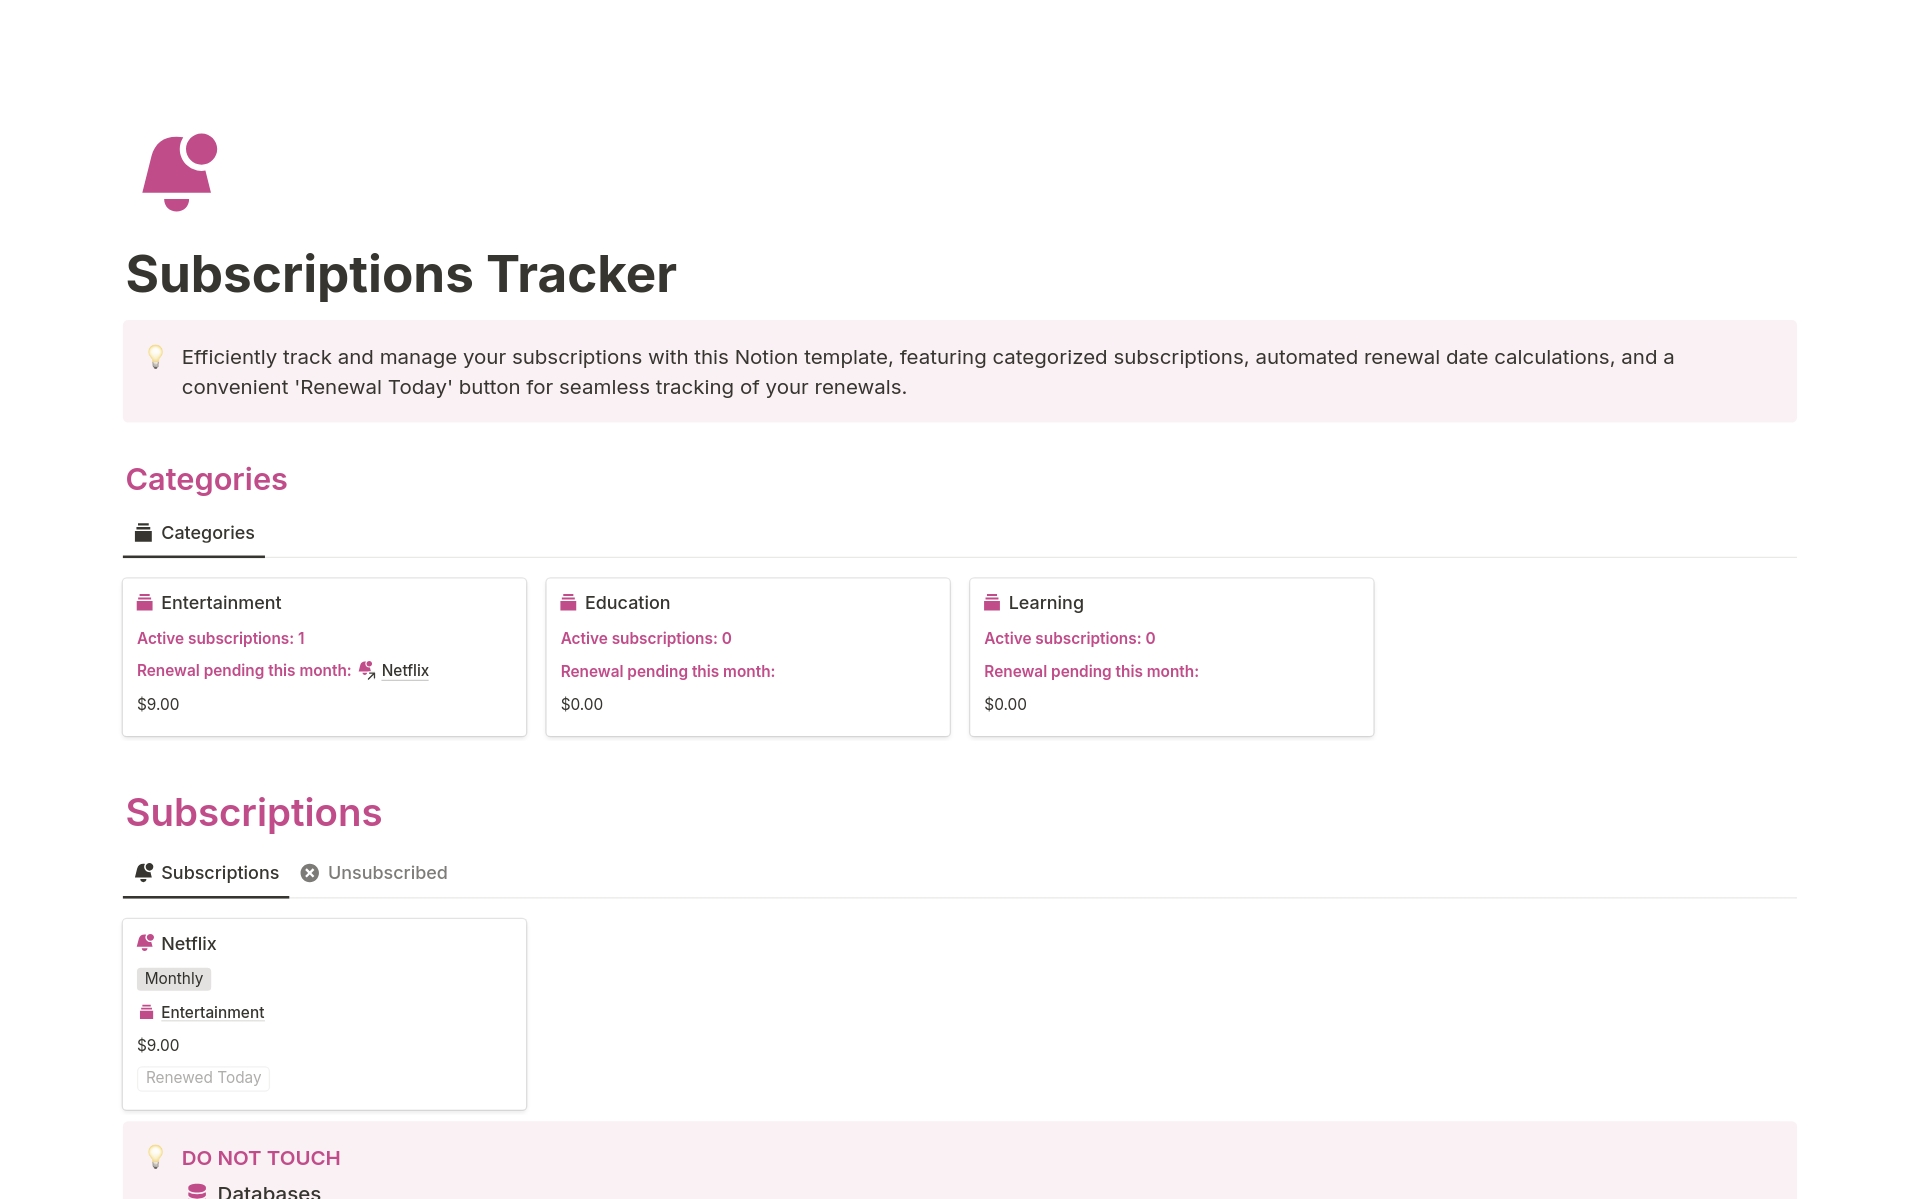 Efficiently track and manage your subscriptions with this Notion template.